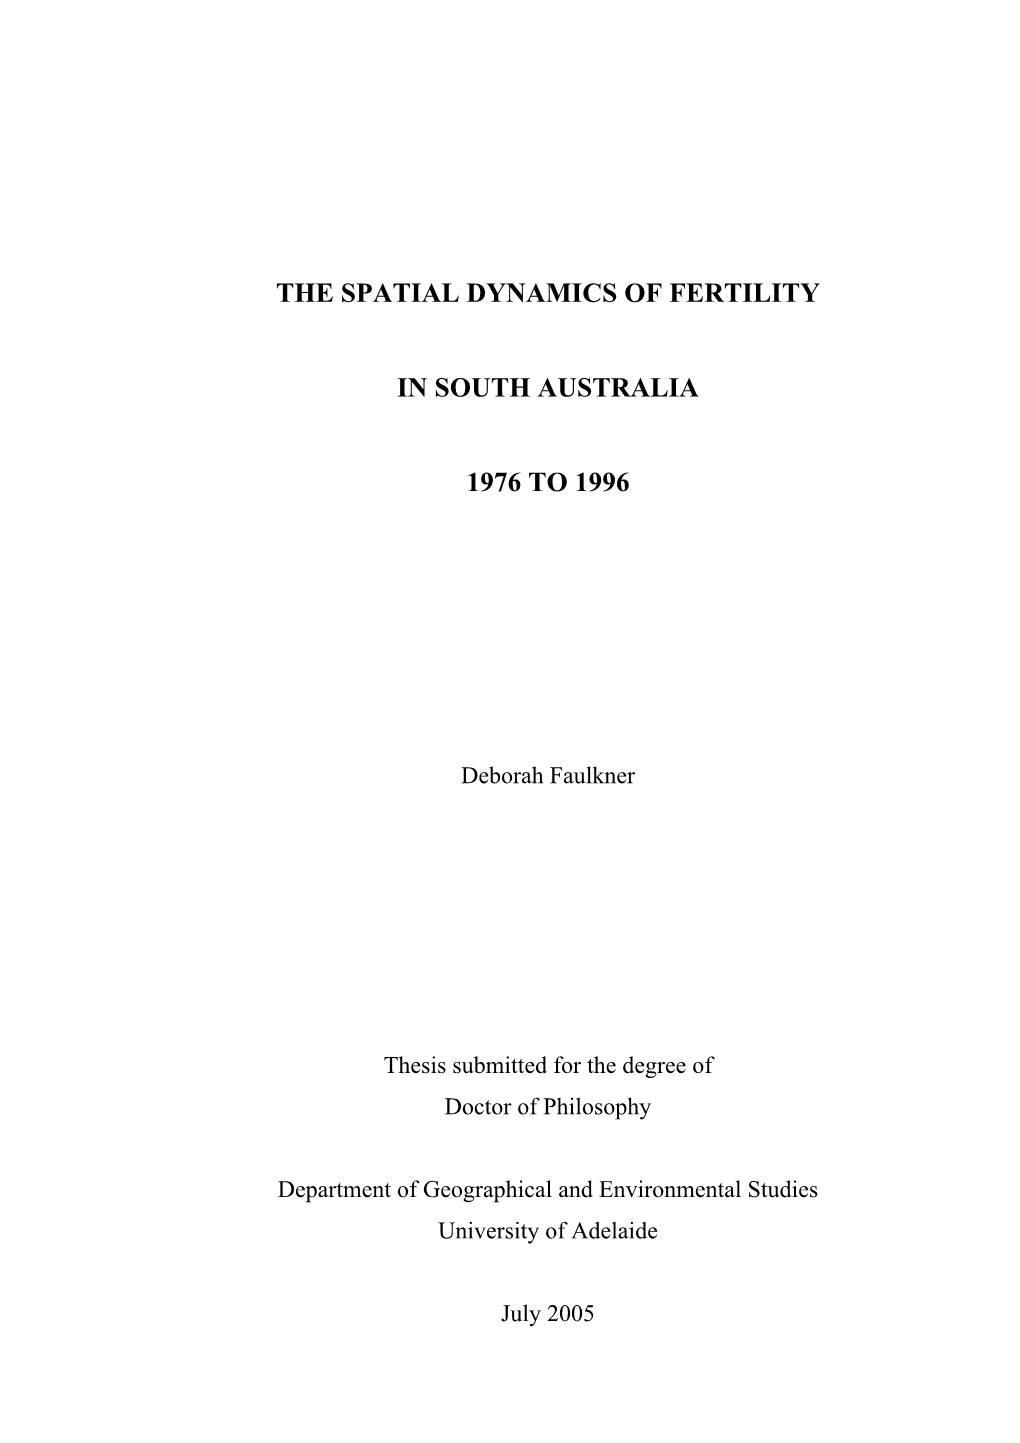 The Spatial Dynamics of Fertility in South Australia, 1976 to 1996